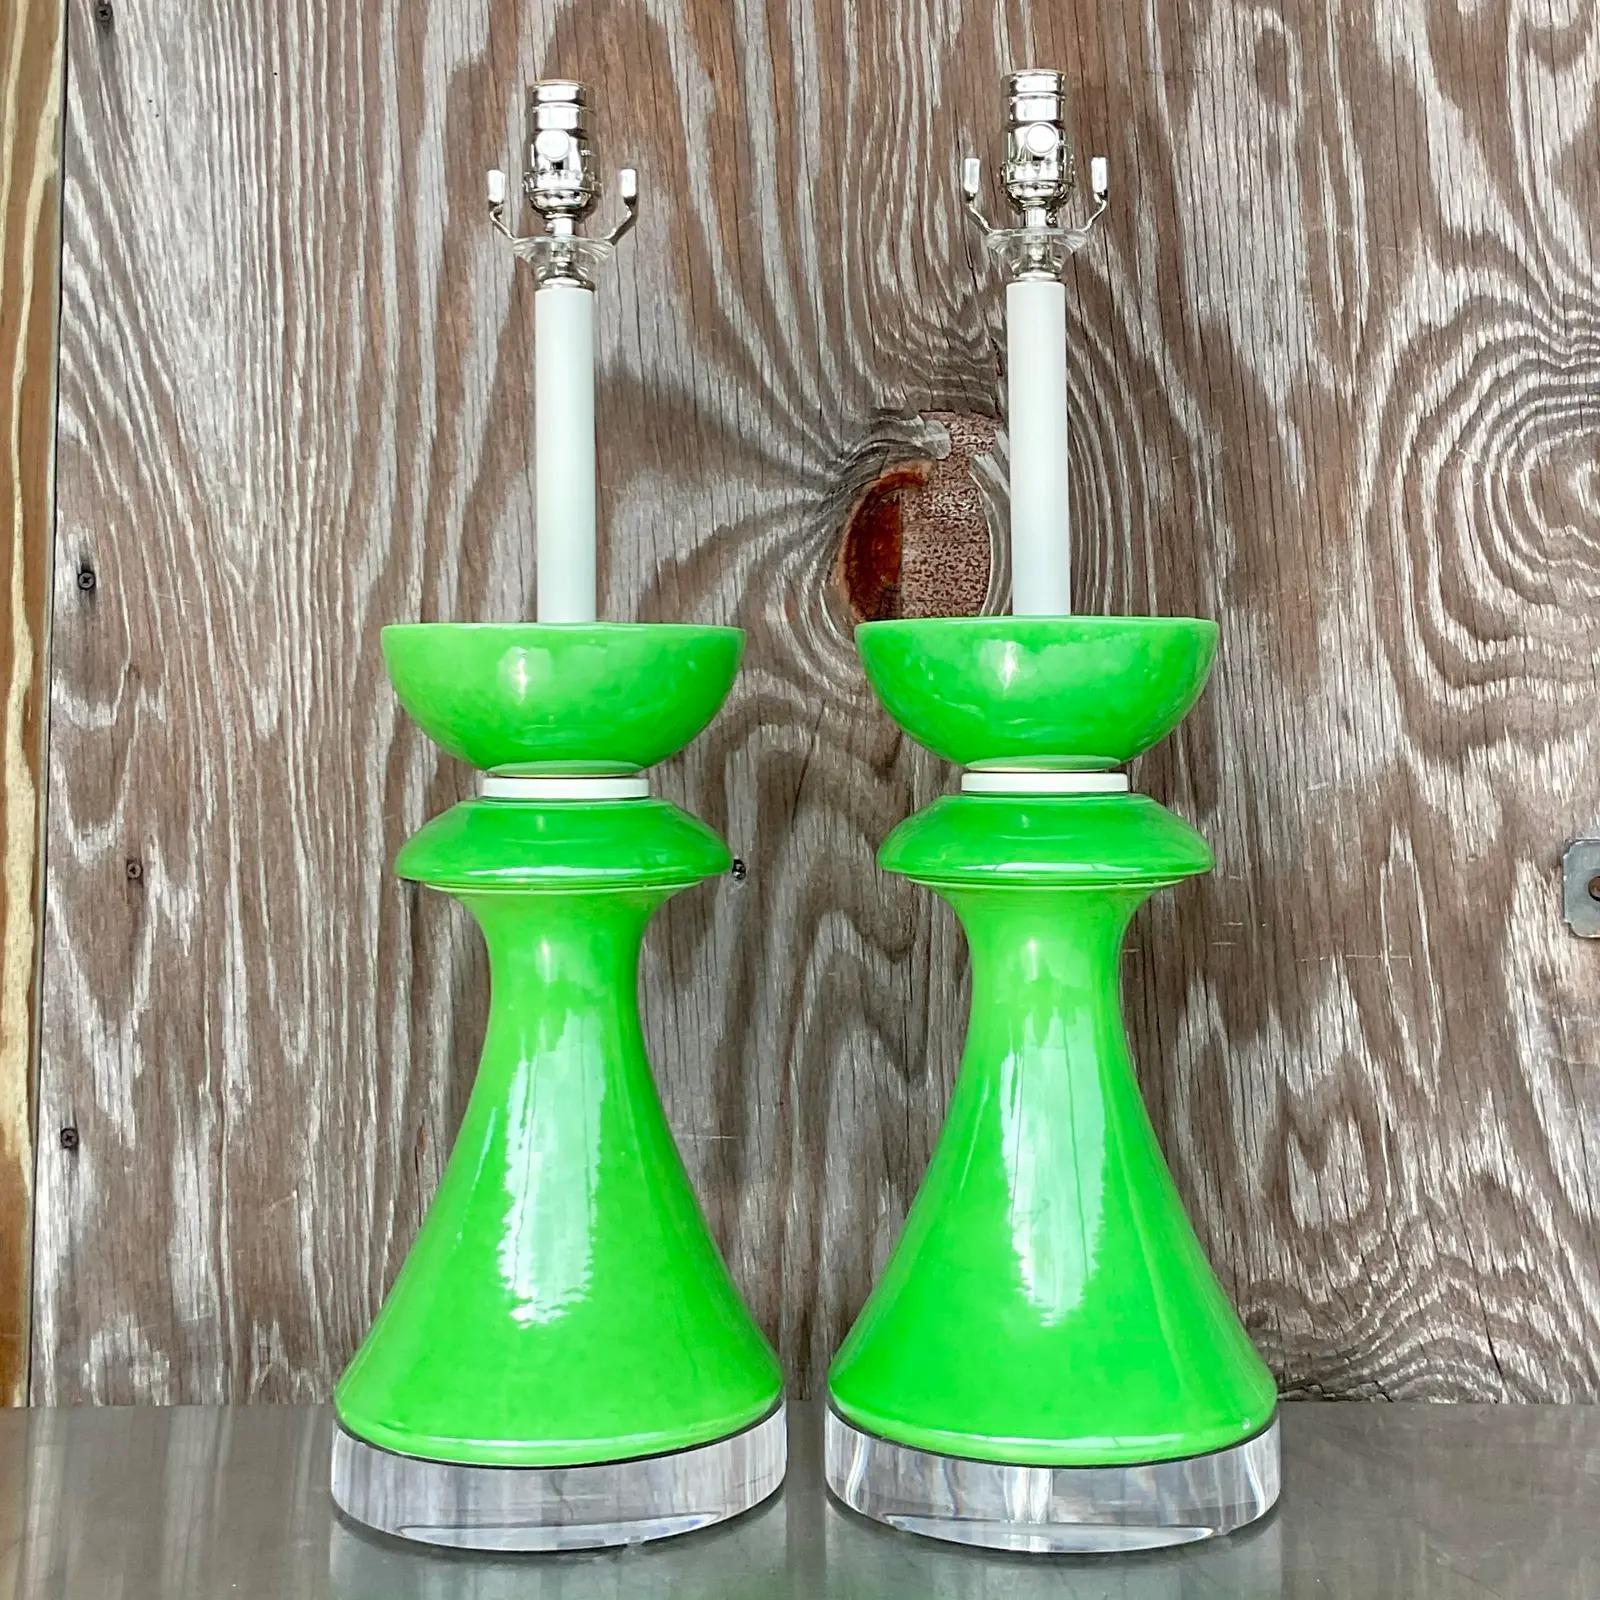 A fabulous vintage Postmodern pair of table lamps. A brilliant Kelly green in a glazed ceramic finish. Fully restored with all new wiring, hardware and lucite plinths. Acquired rom a Palm Beach estate.